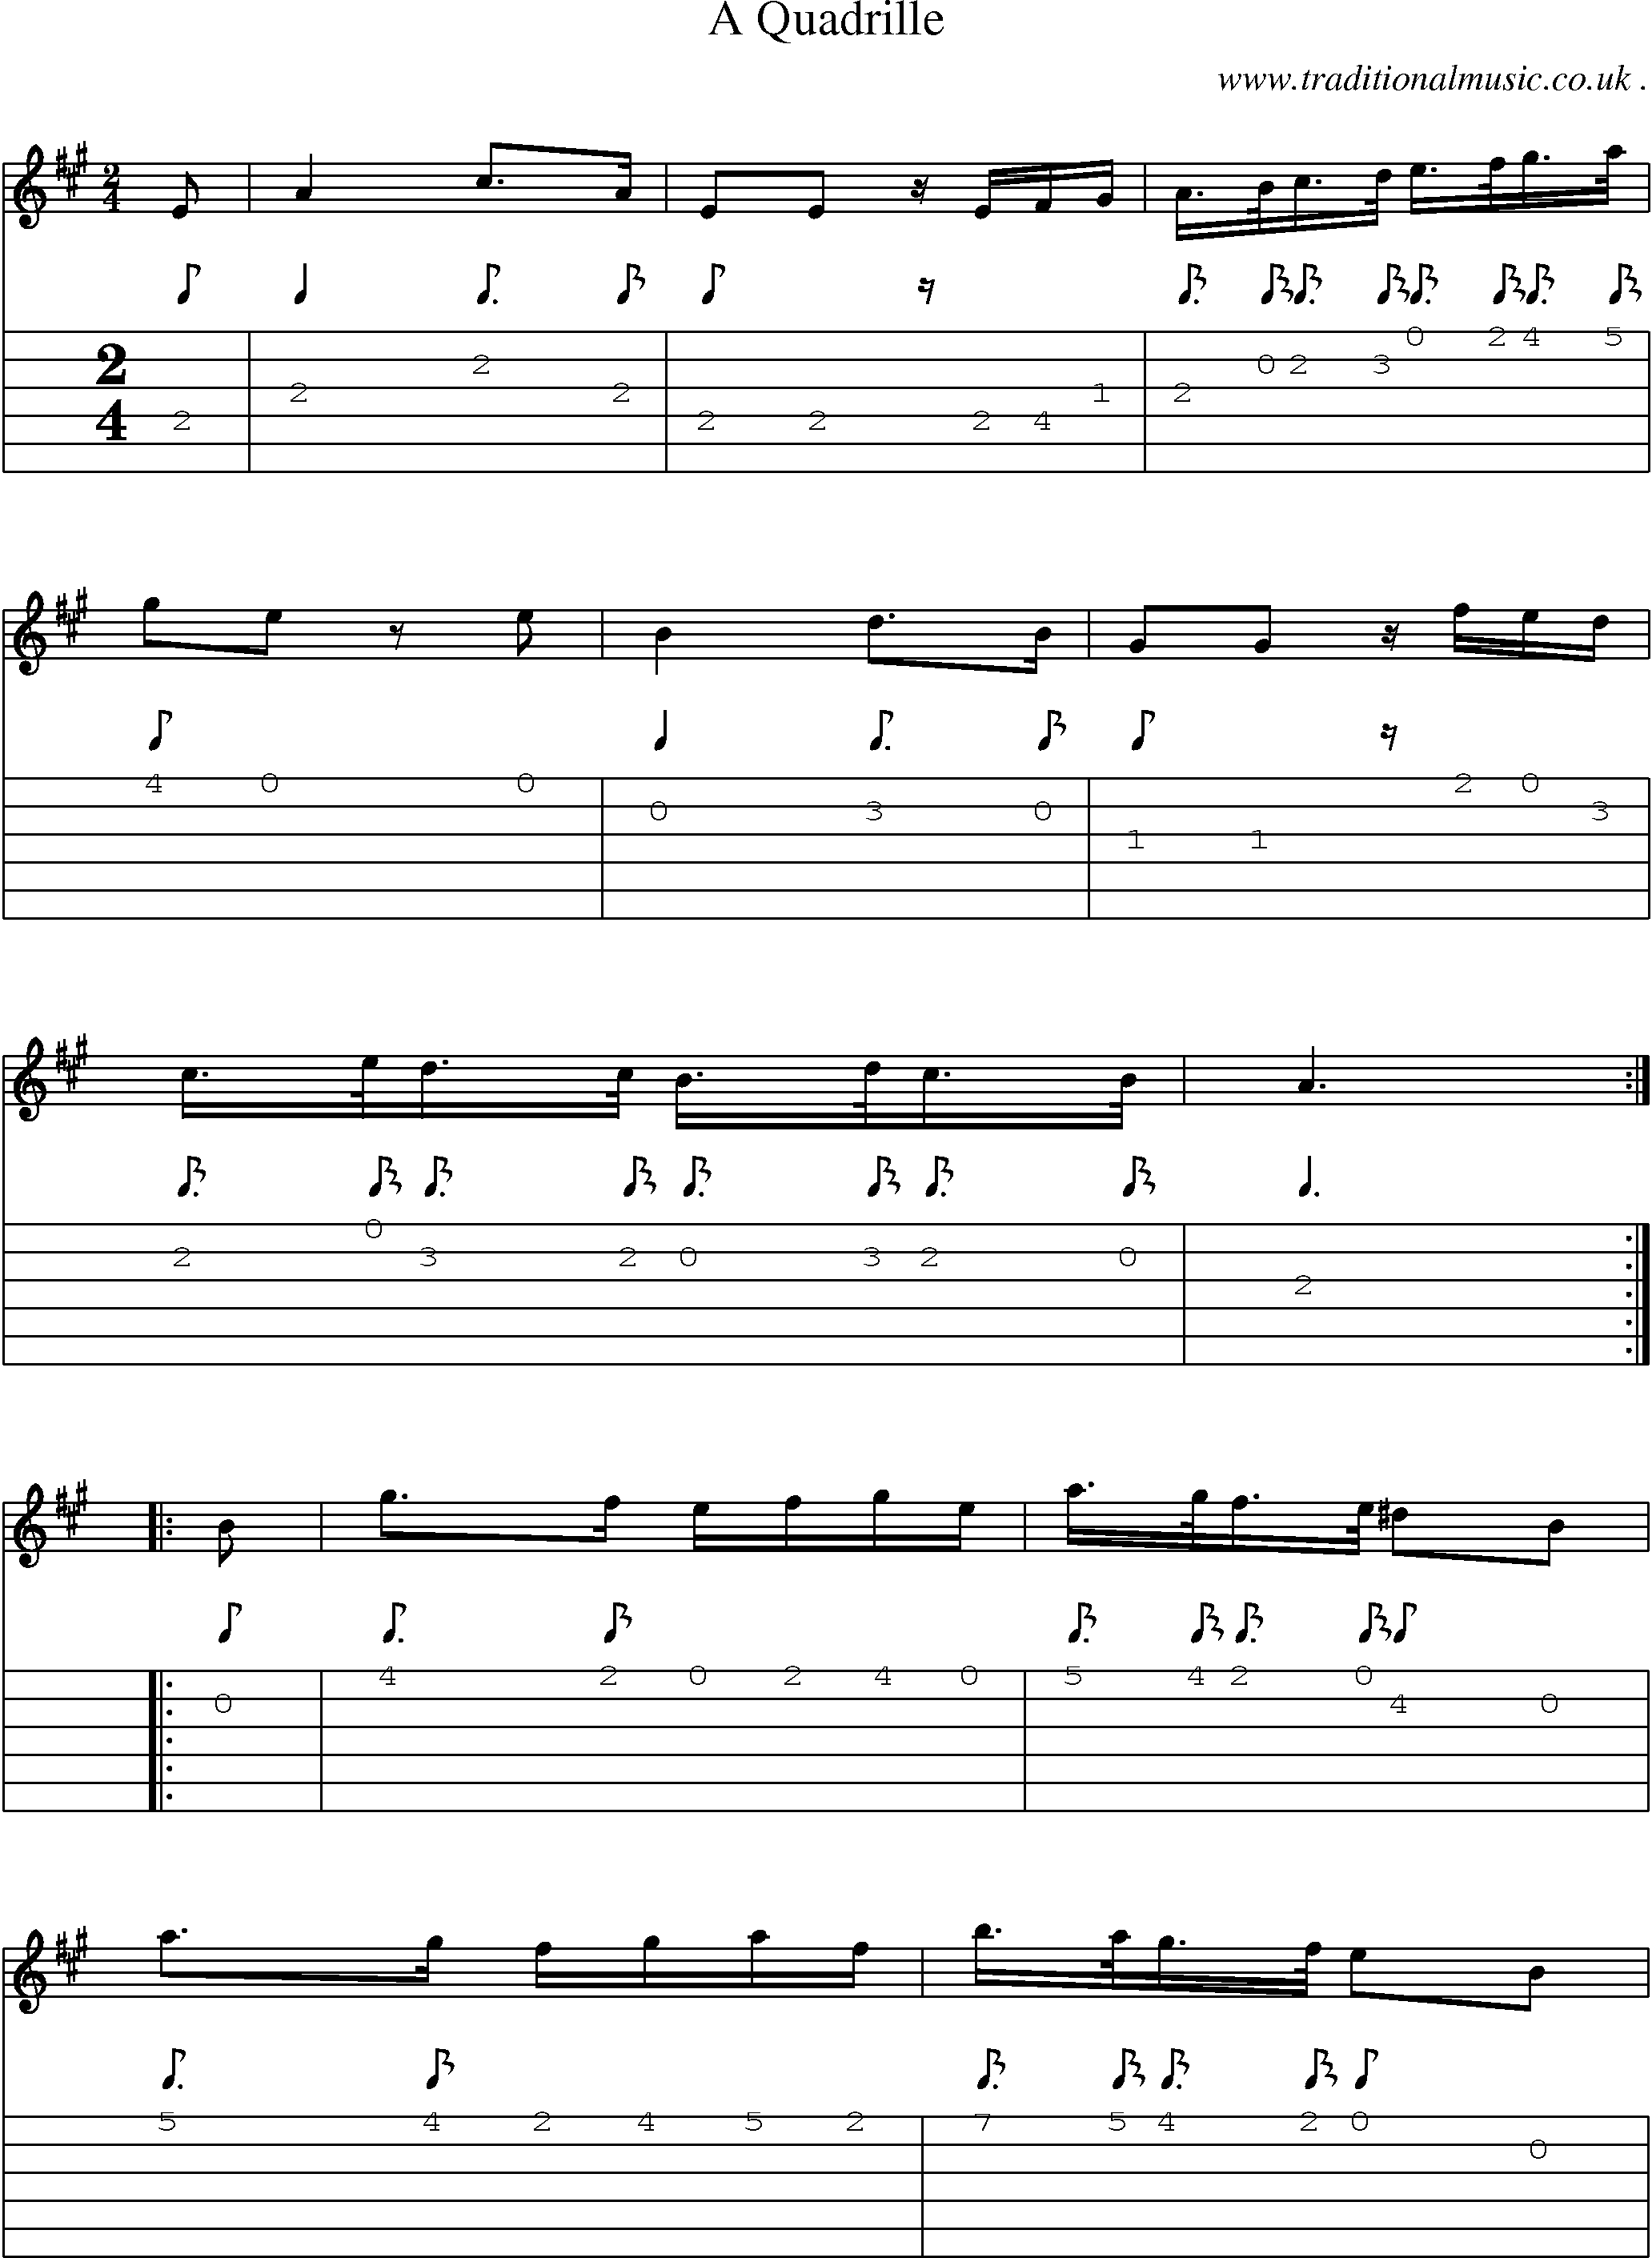 Sheet-Music and Guitar Tabs for A Quadrille